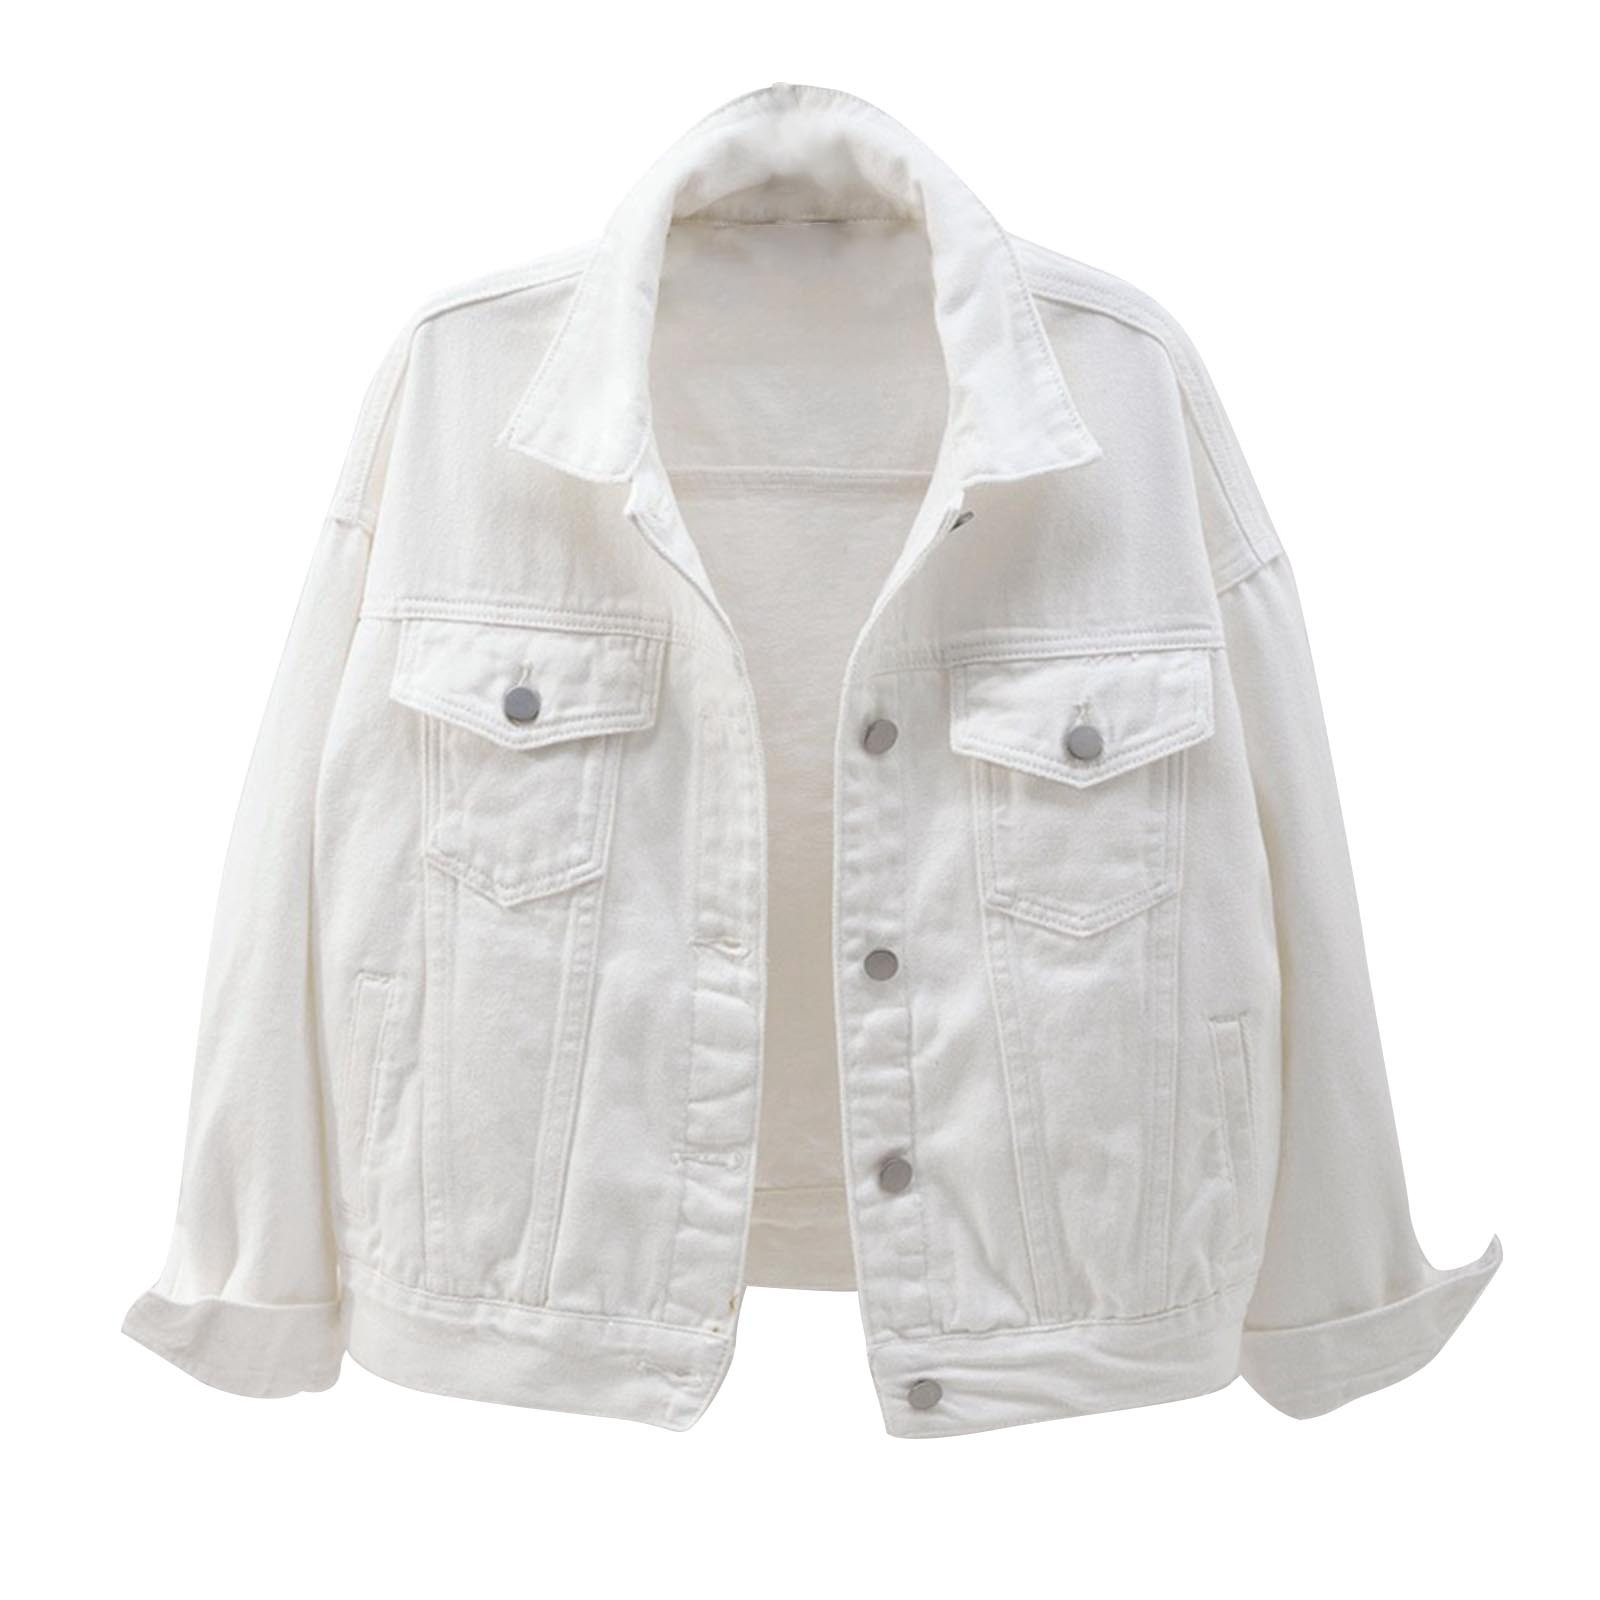 Discover more than 179 max denim jacket for women latest